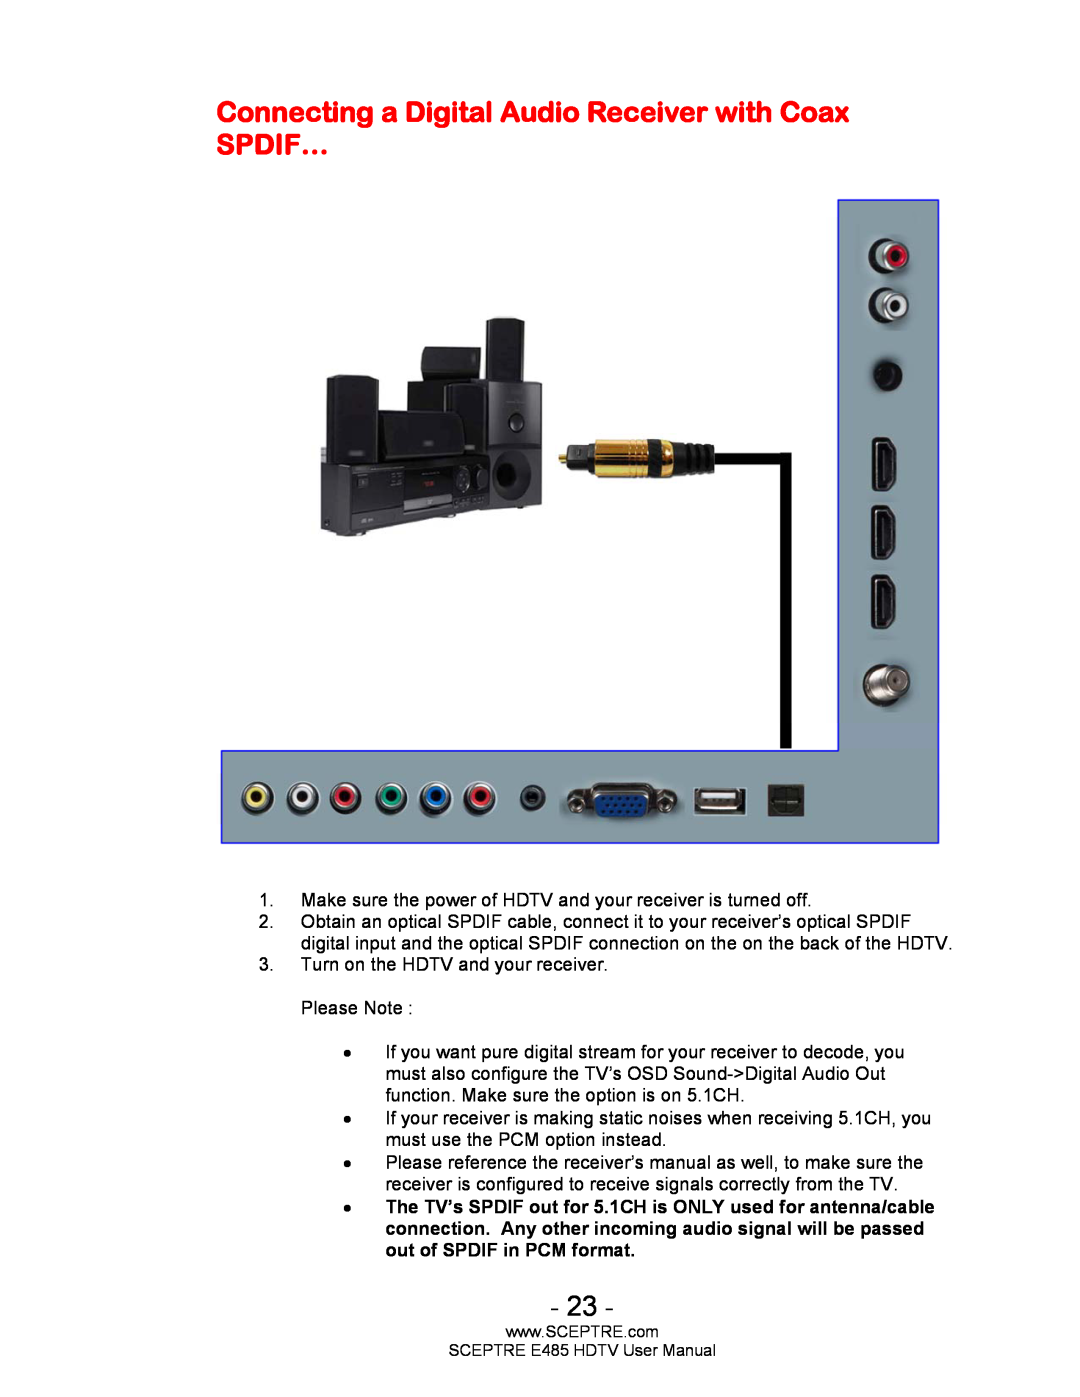 Sceptre Technologies E485 user manual Connecting a Digital Audio Receiver with Coax SPDIF… 